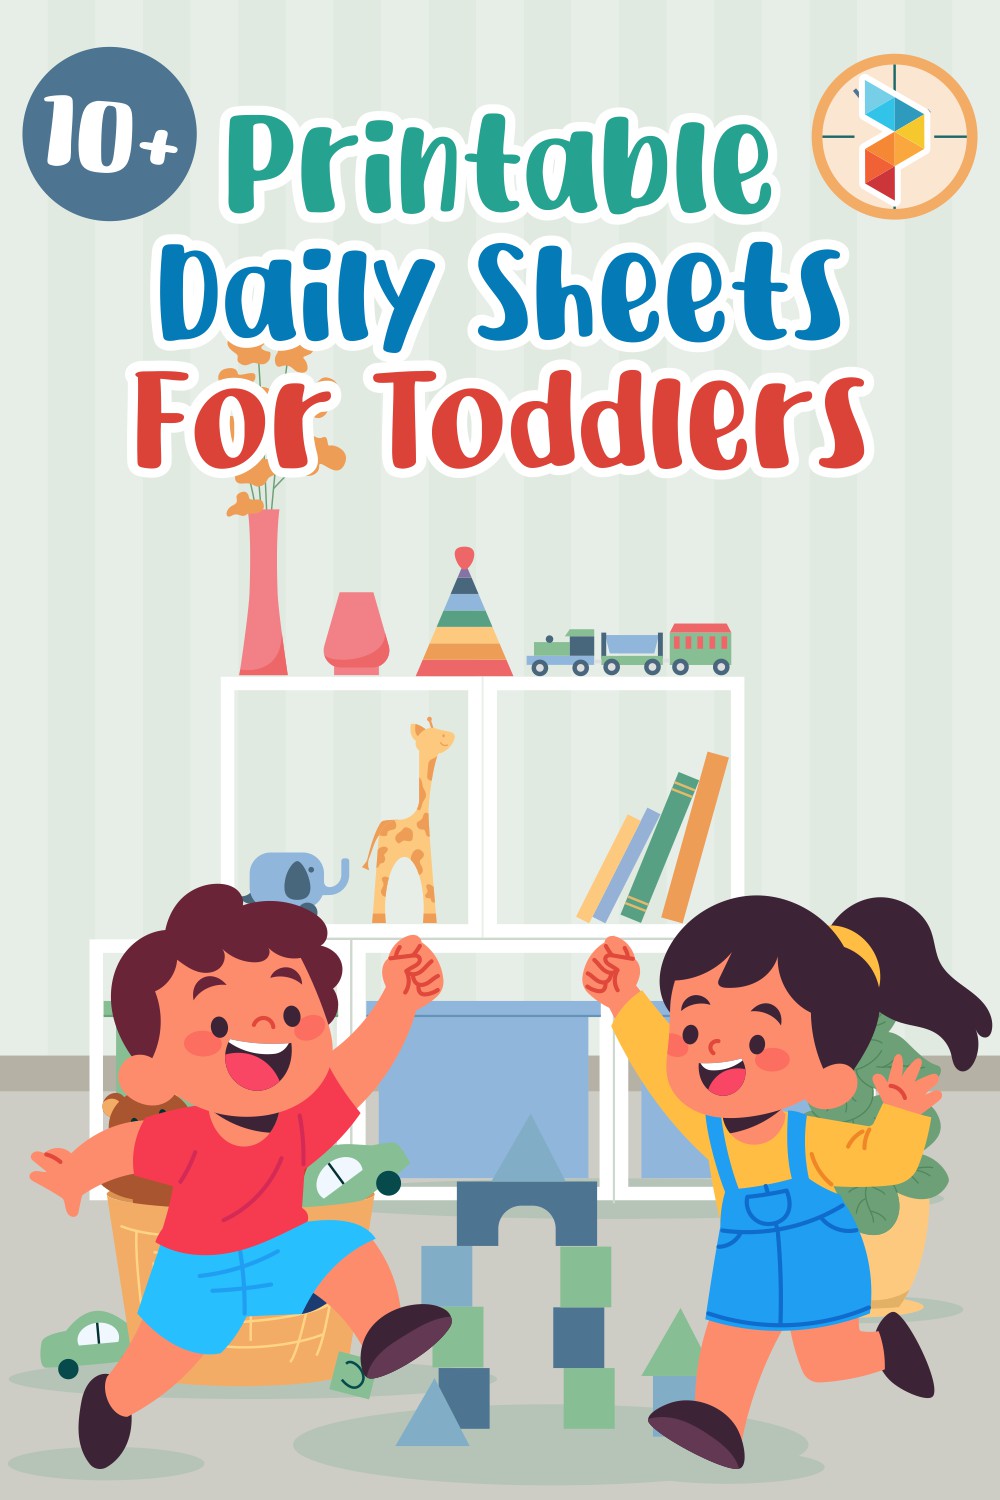 Printable Daily Sheets For Toddlers